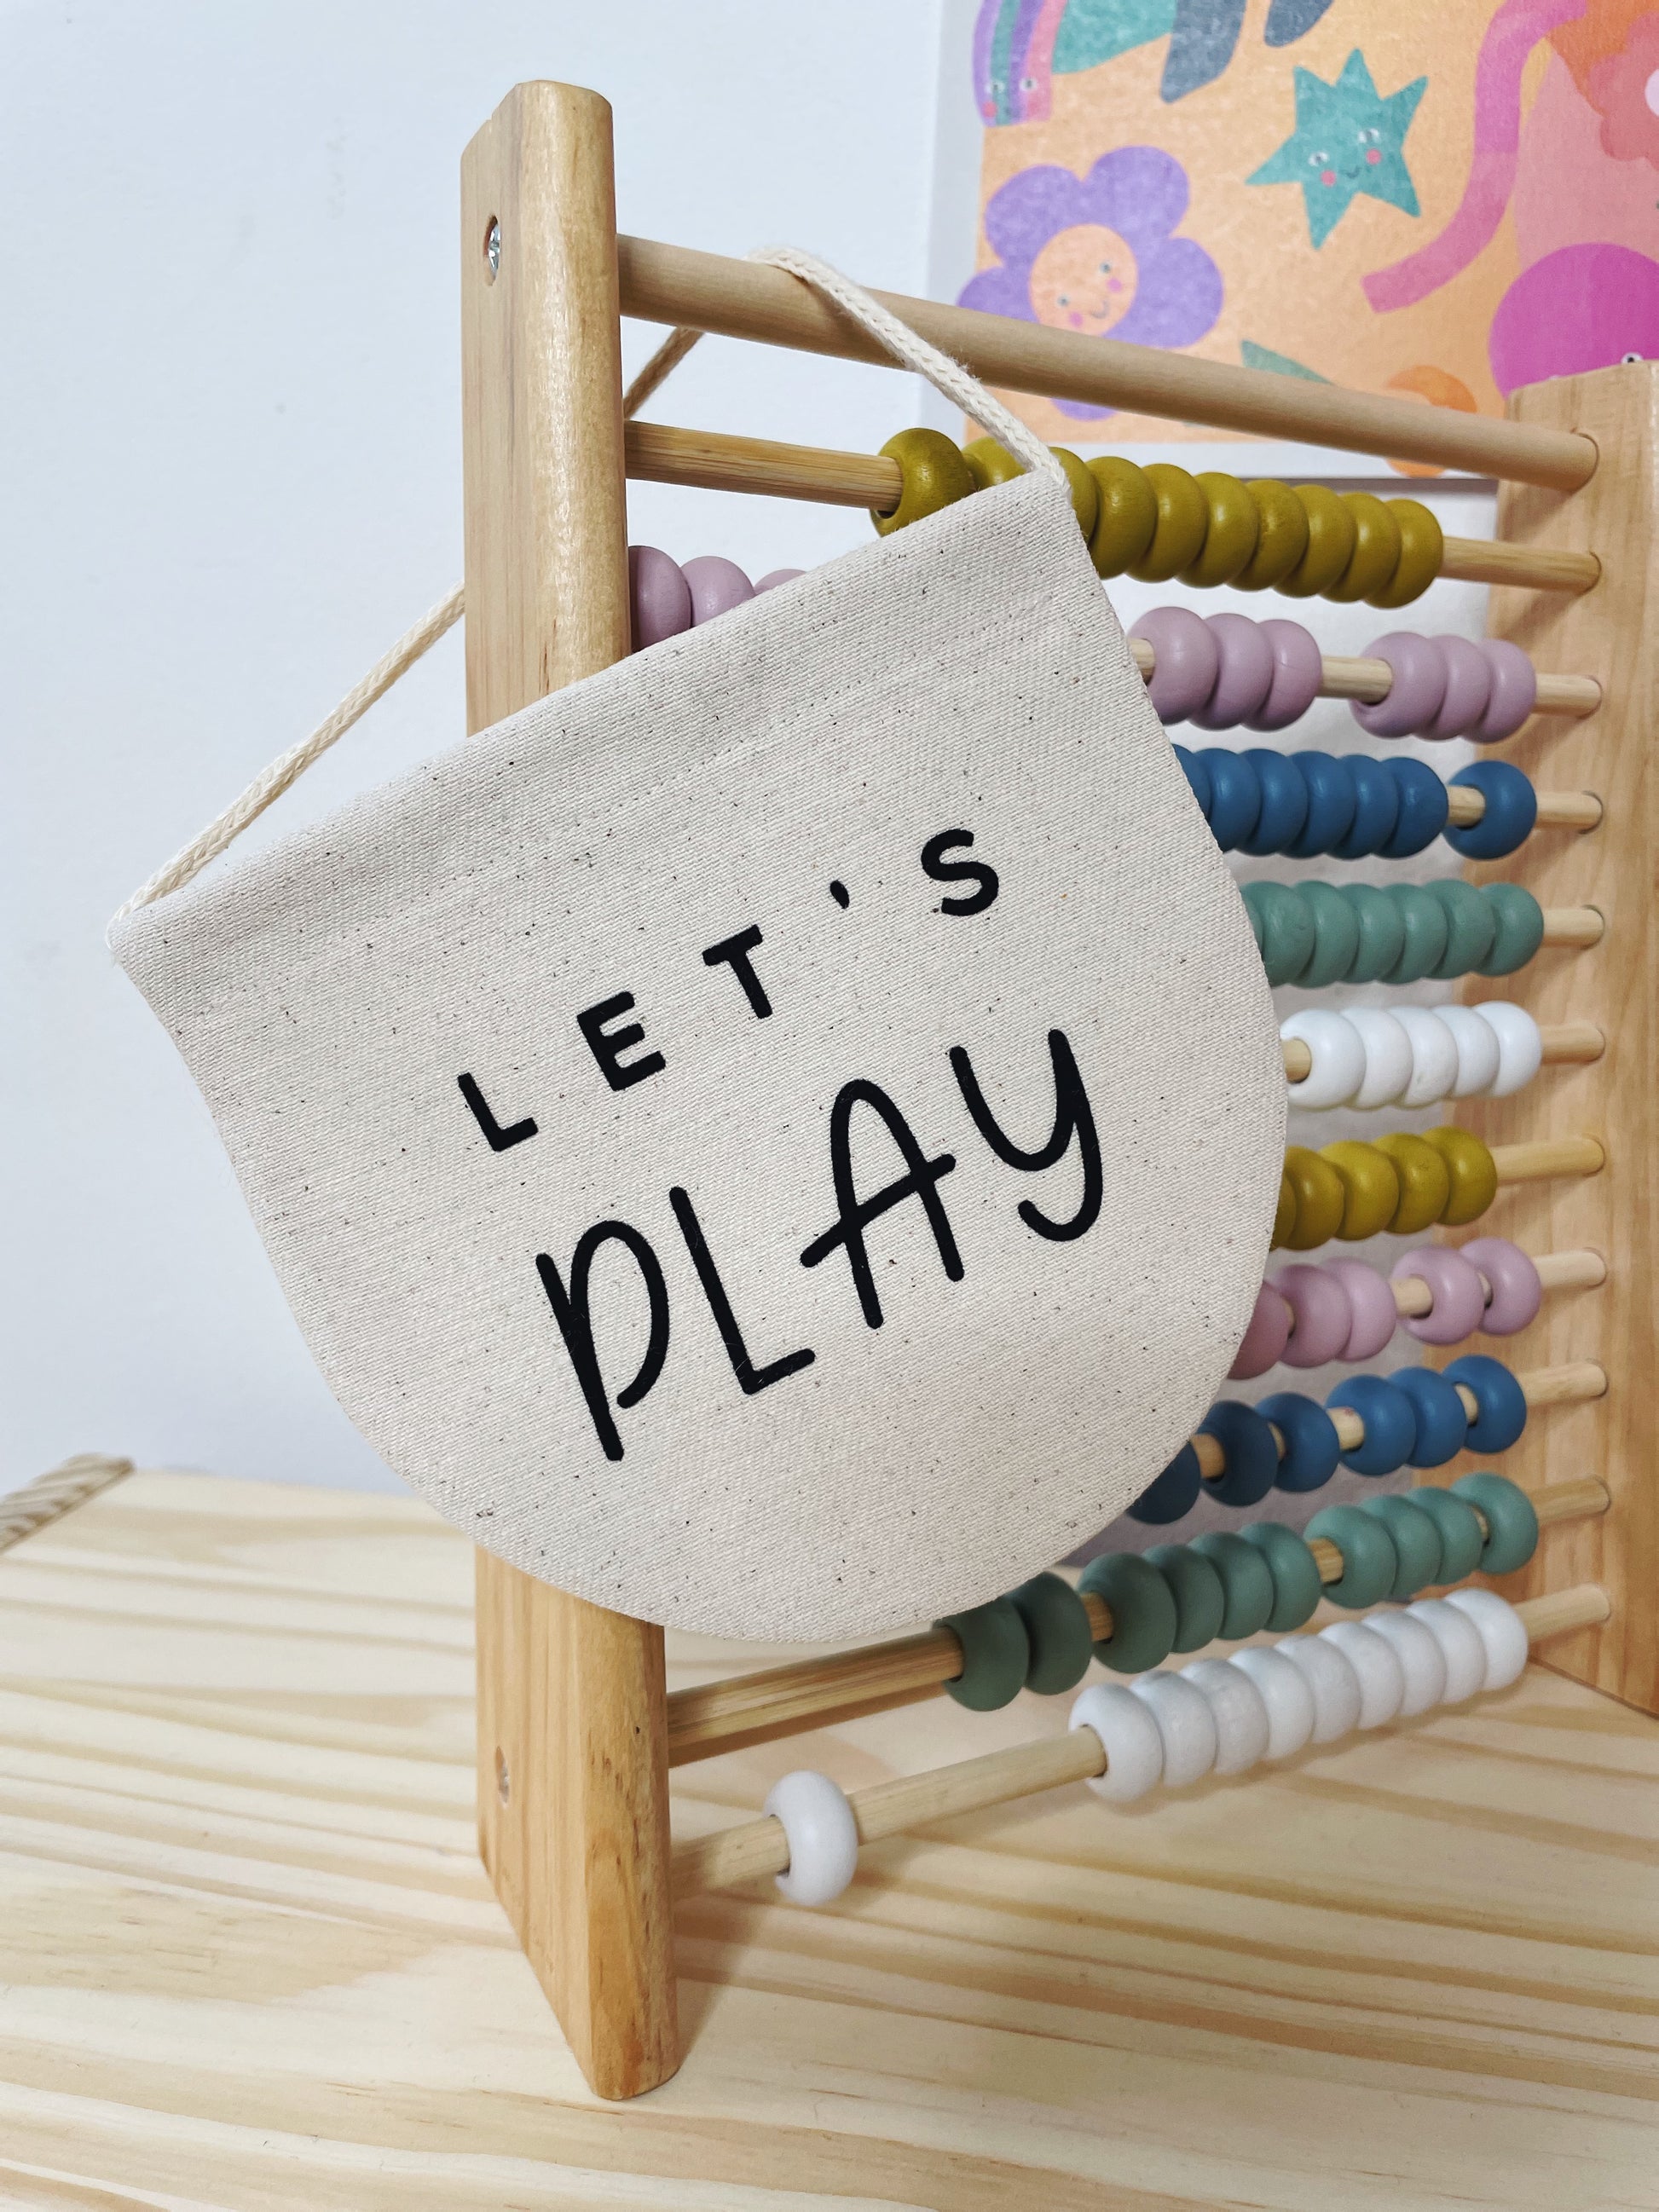 Colourful abacus with a beige banner hanging off it, reading 'Let's Play'